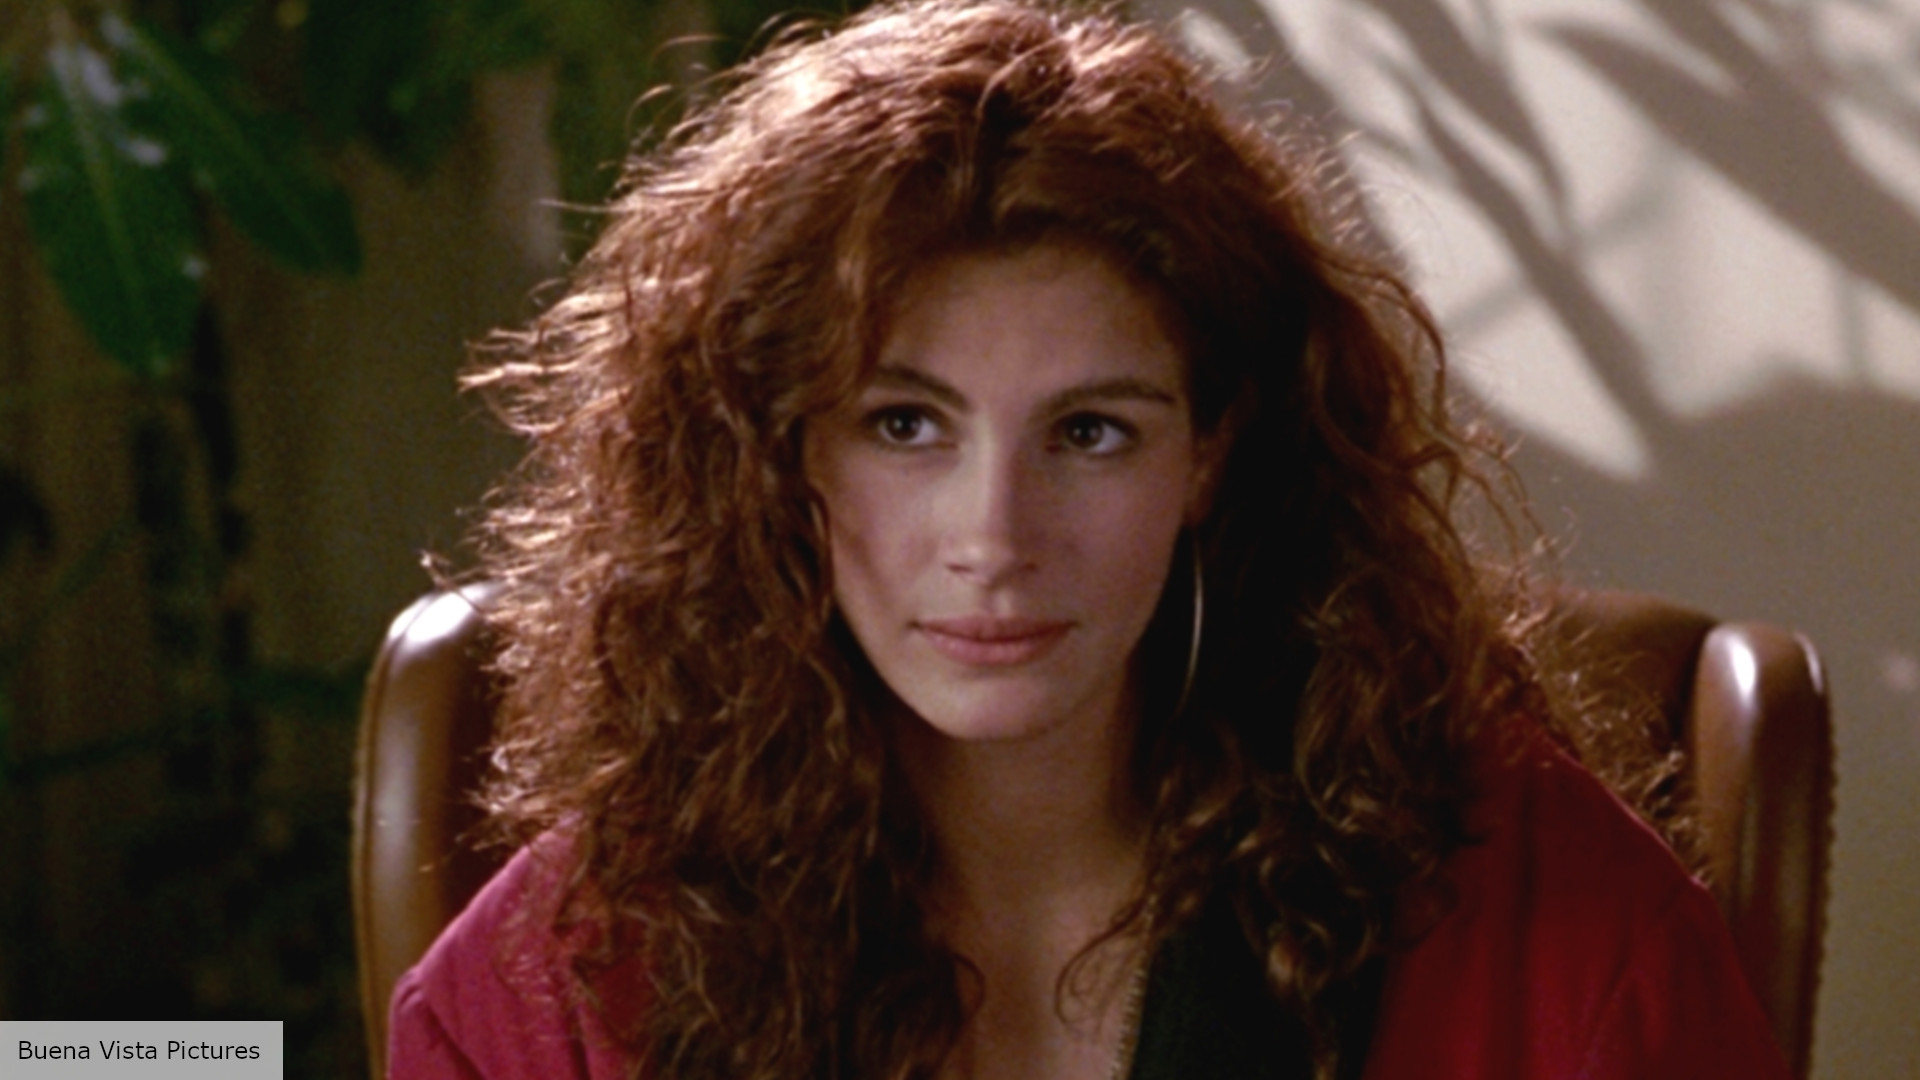 Julia Roberts’ Pretty Woman role nearly went to this ’80s movie star